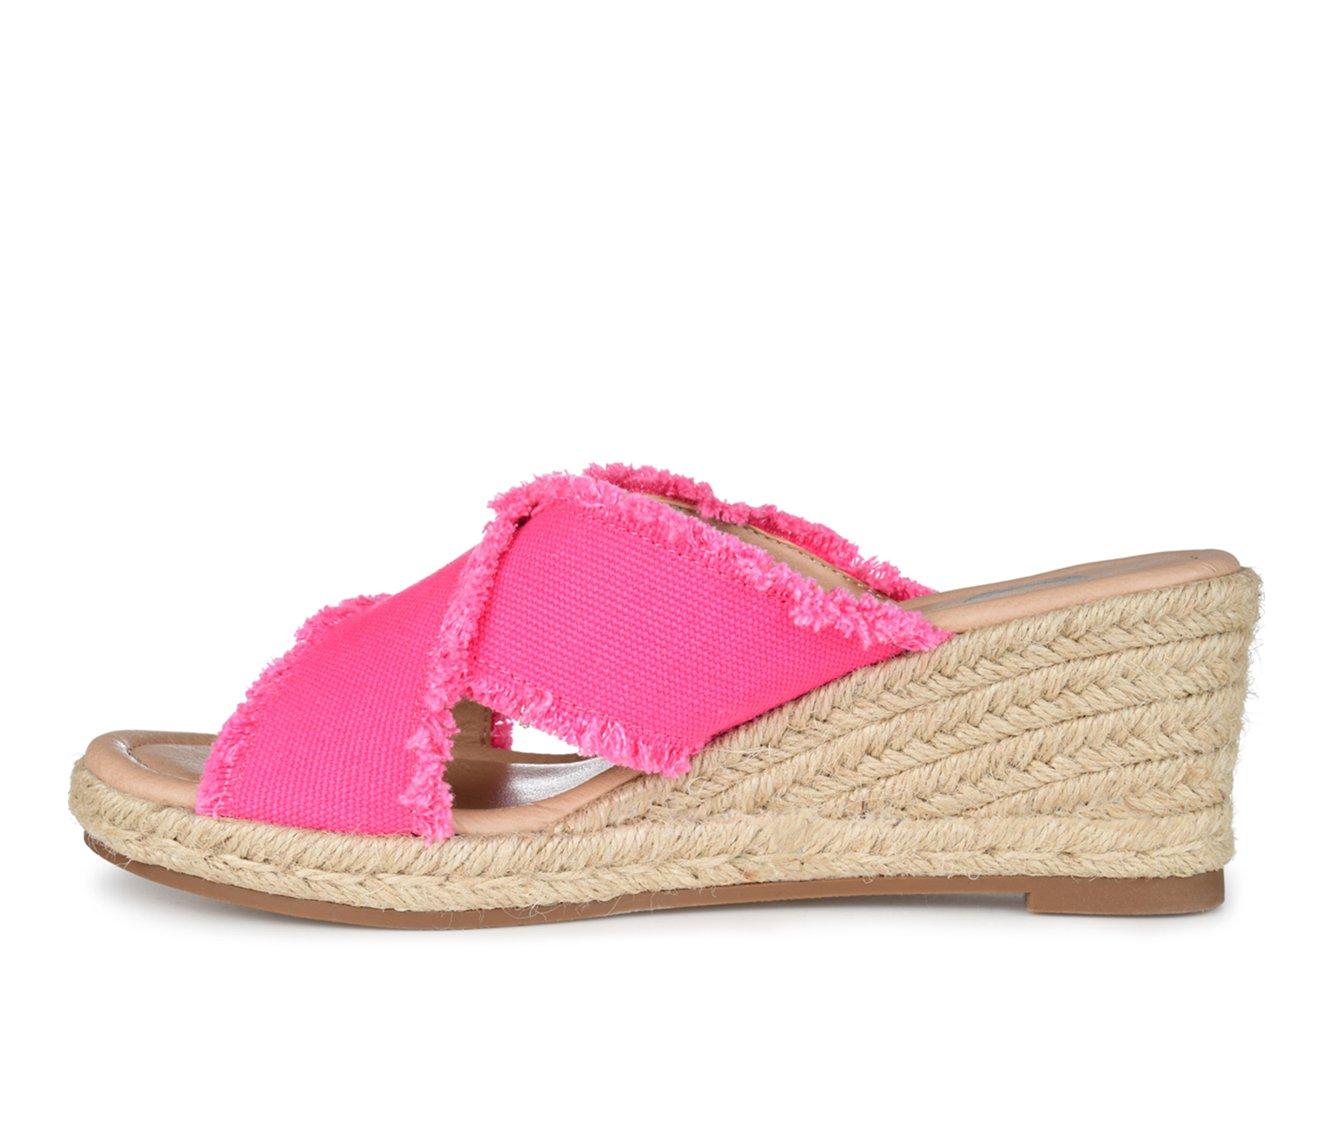 Women's Journee Collection Shanni Wedge Sandals